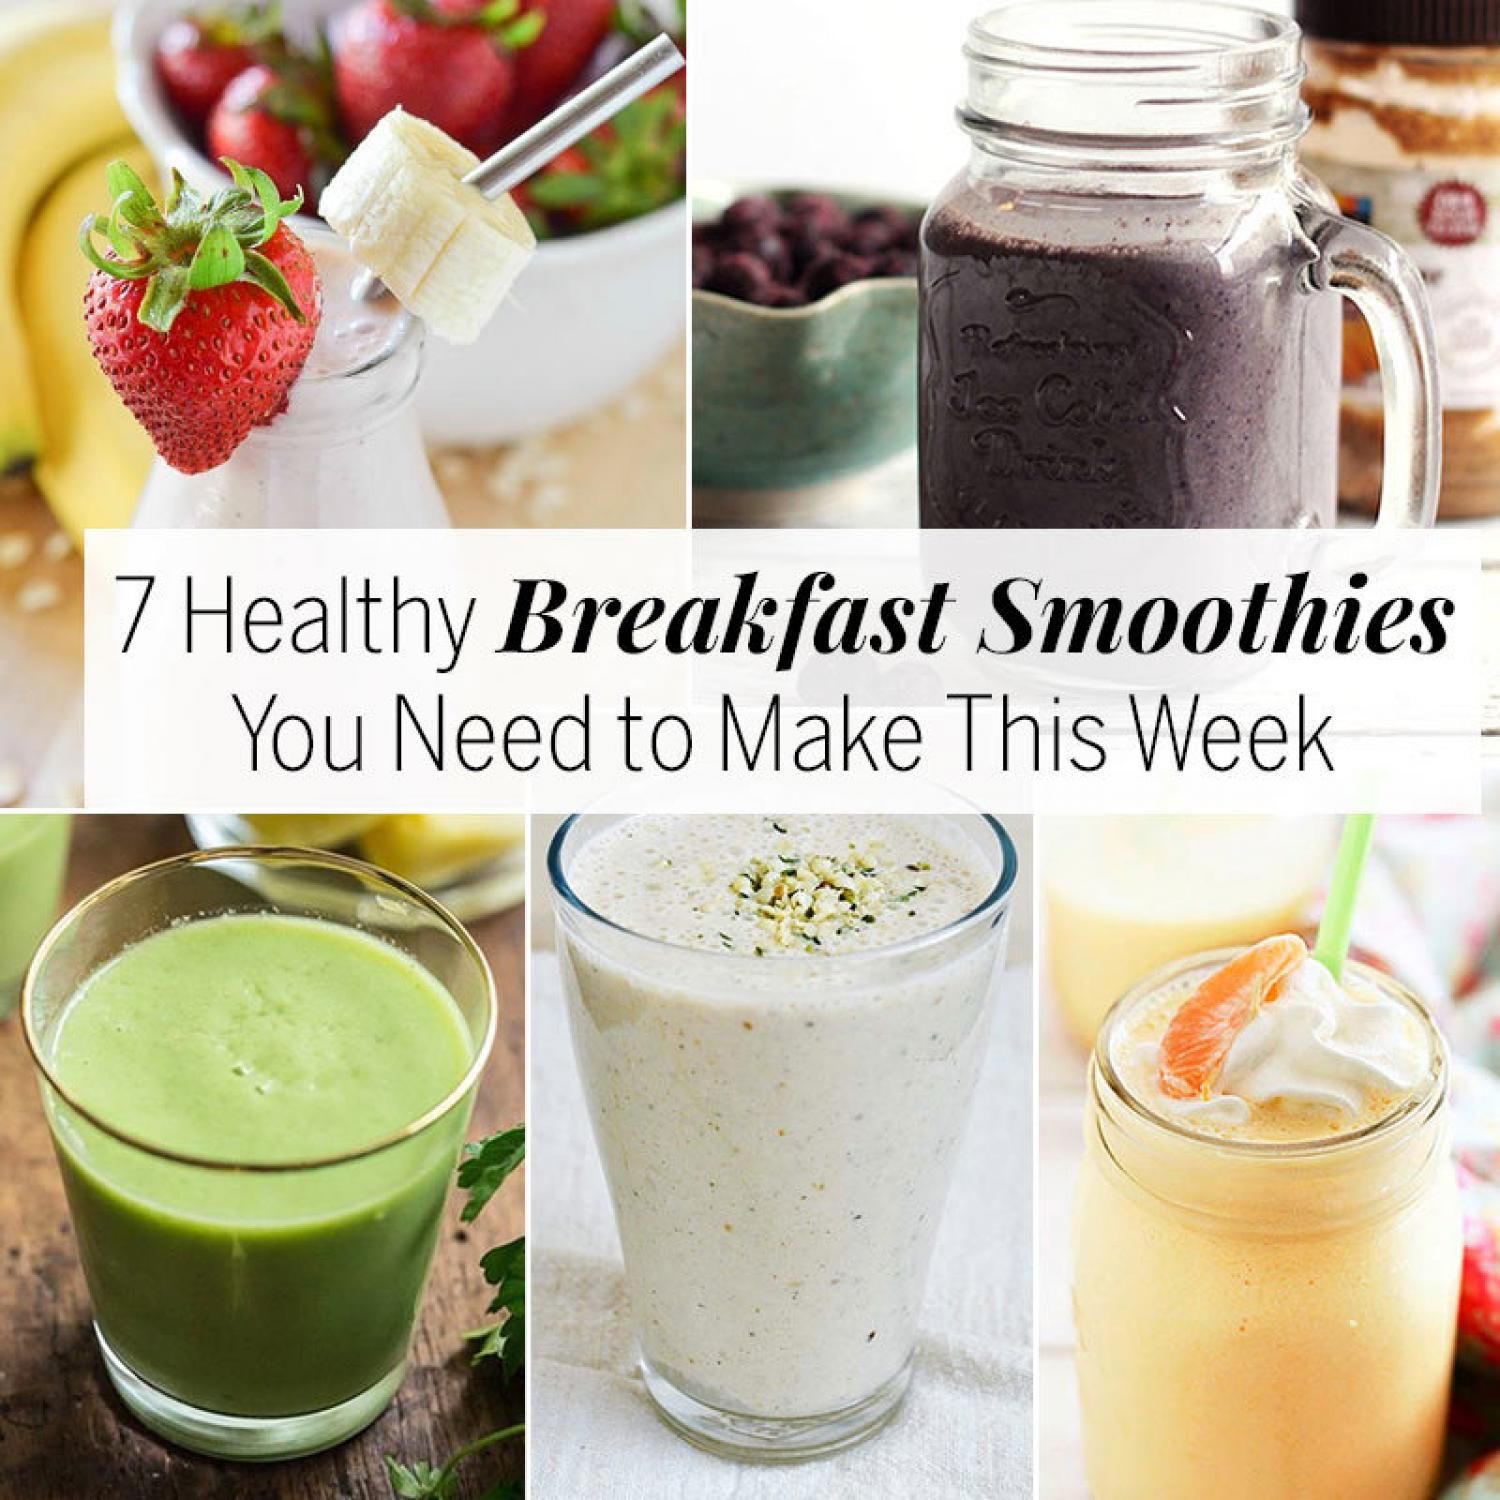 Healthy Breakfast Smoothie Recipes That Don